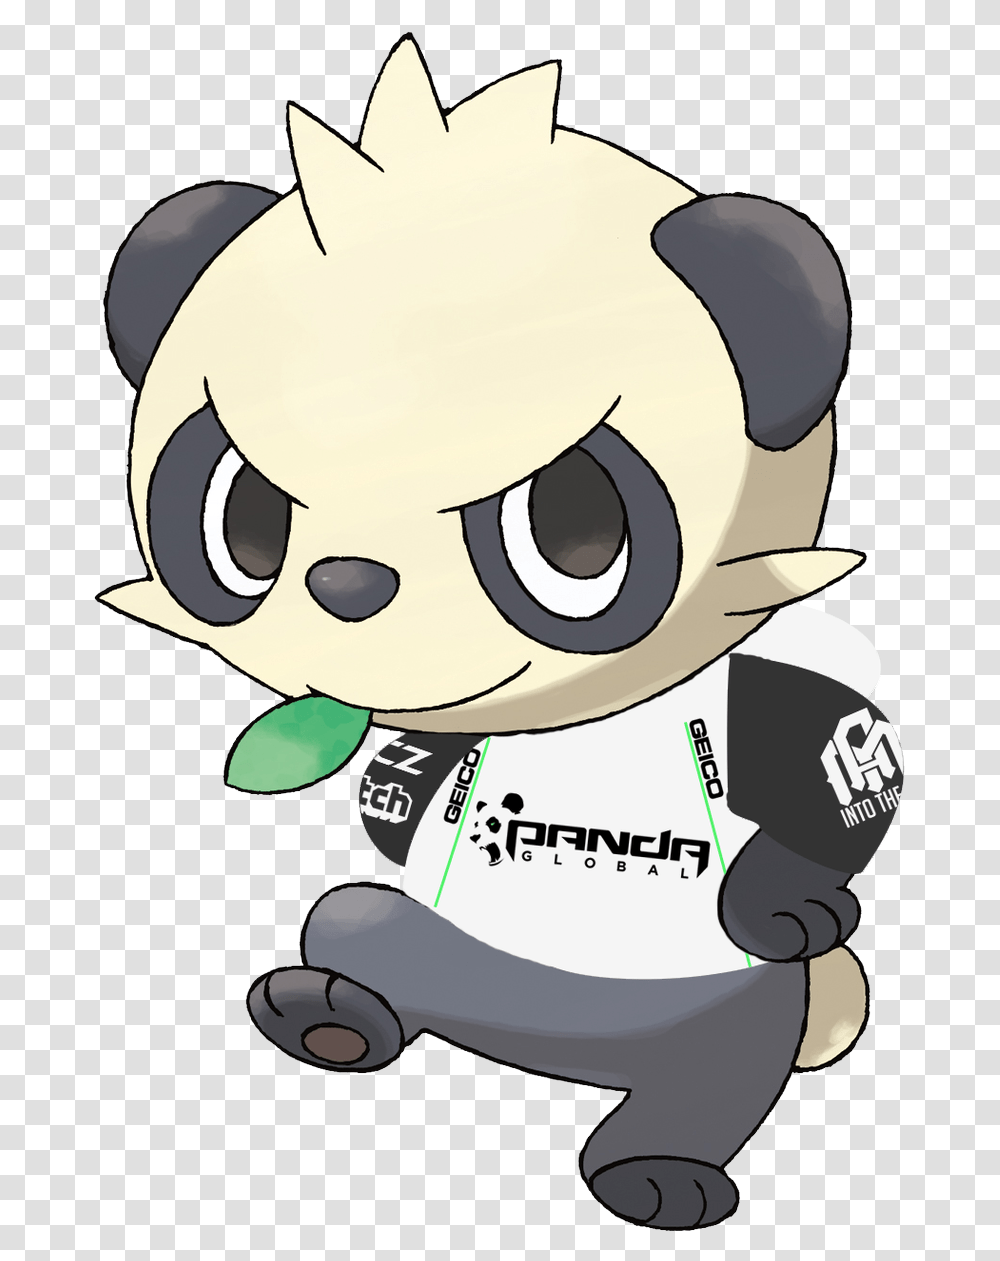 Since It's A New Day That Means Pokemon Profile Pokemon Pancham, Plush, Toy, Angry Birds Transparent Png